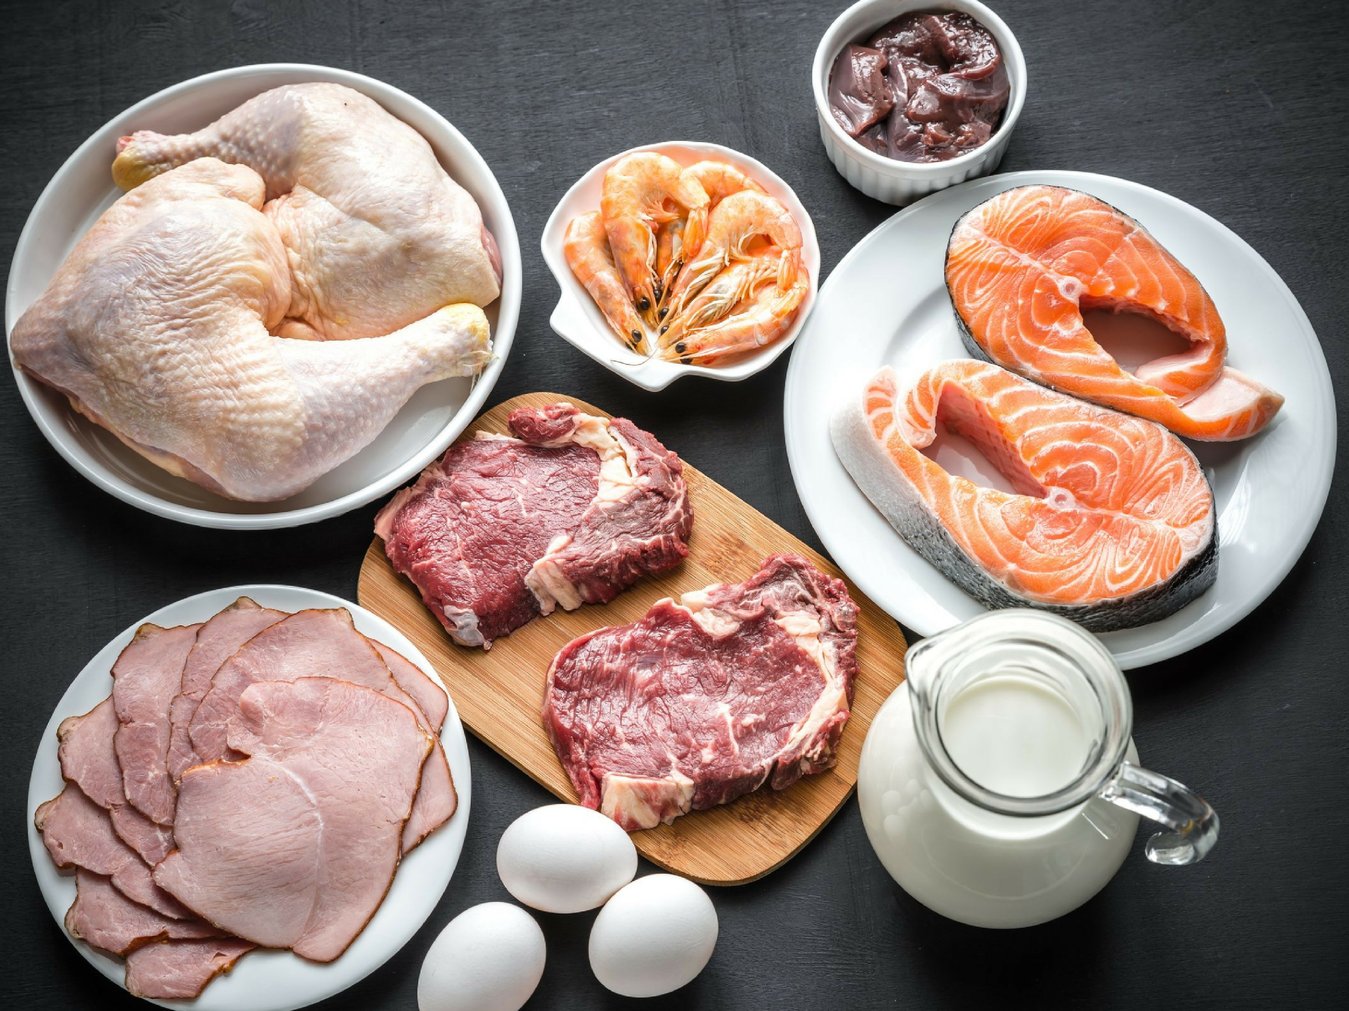 New protein choices complicate food safety and handling